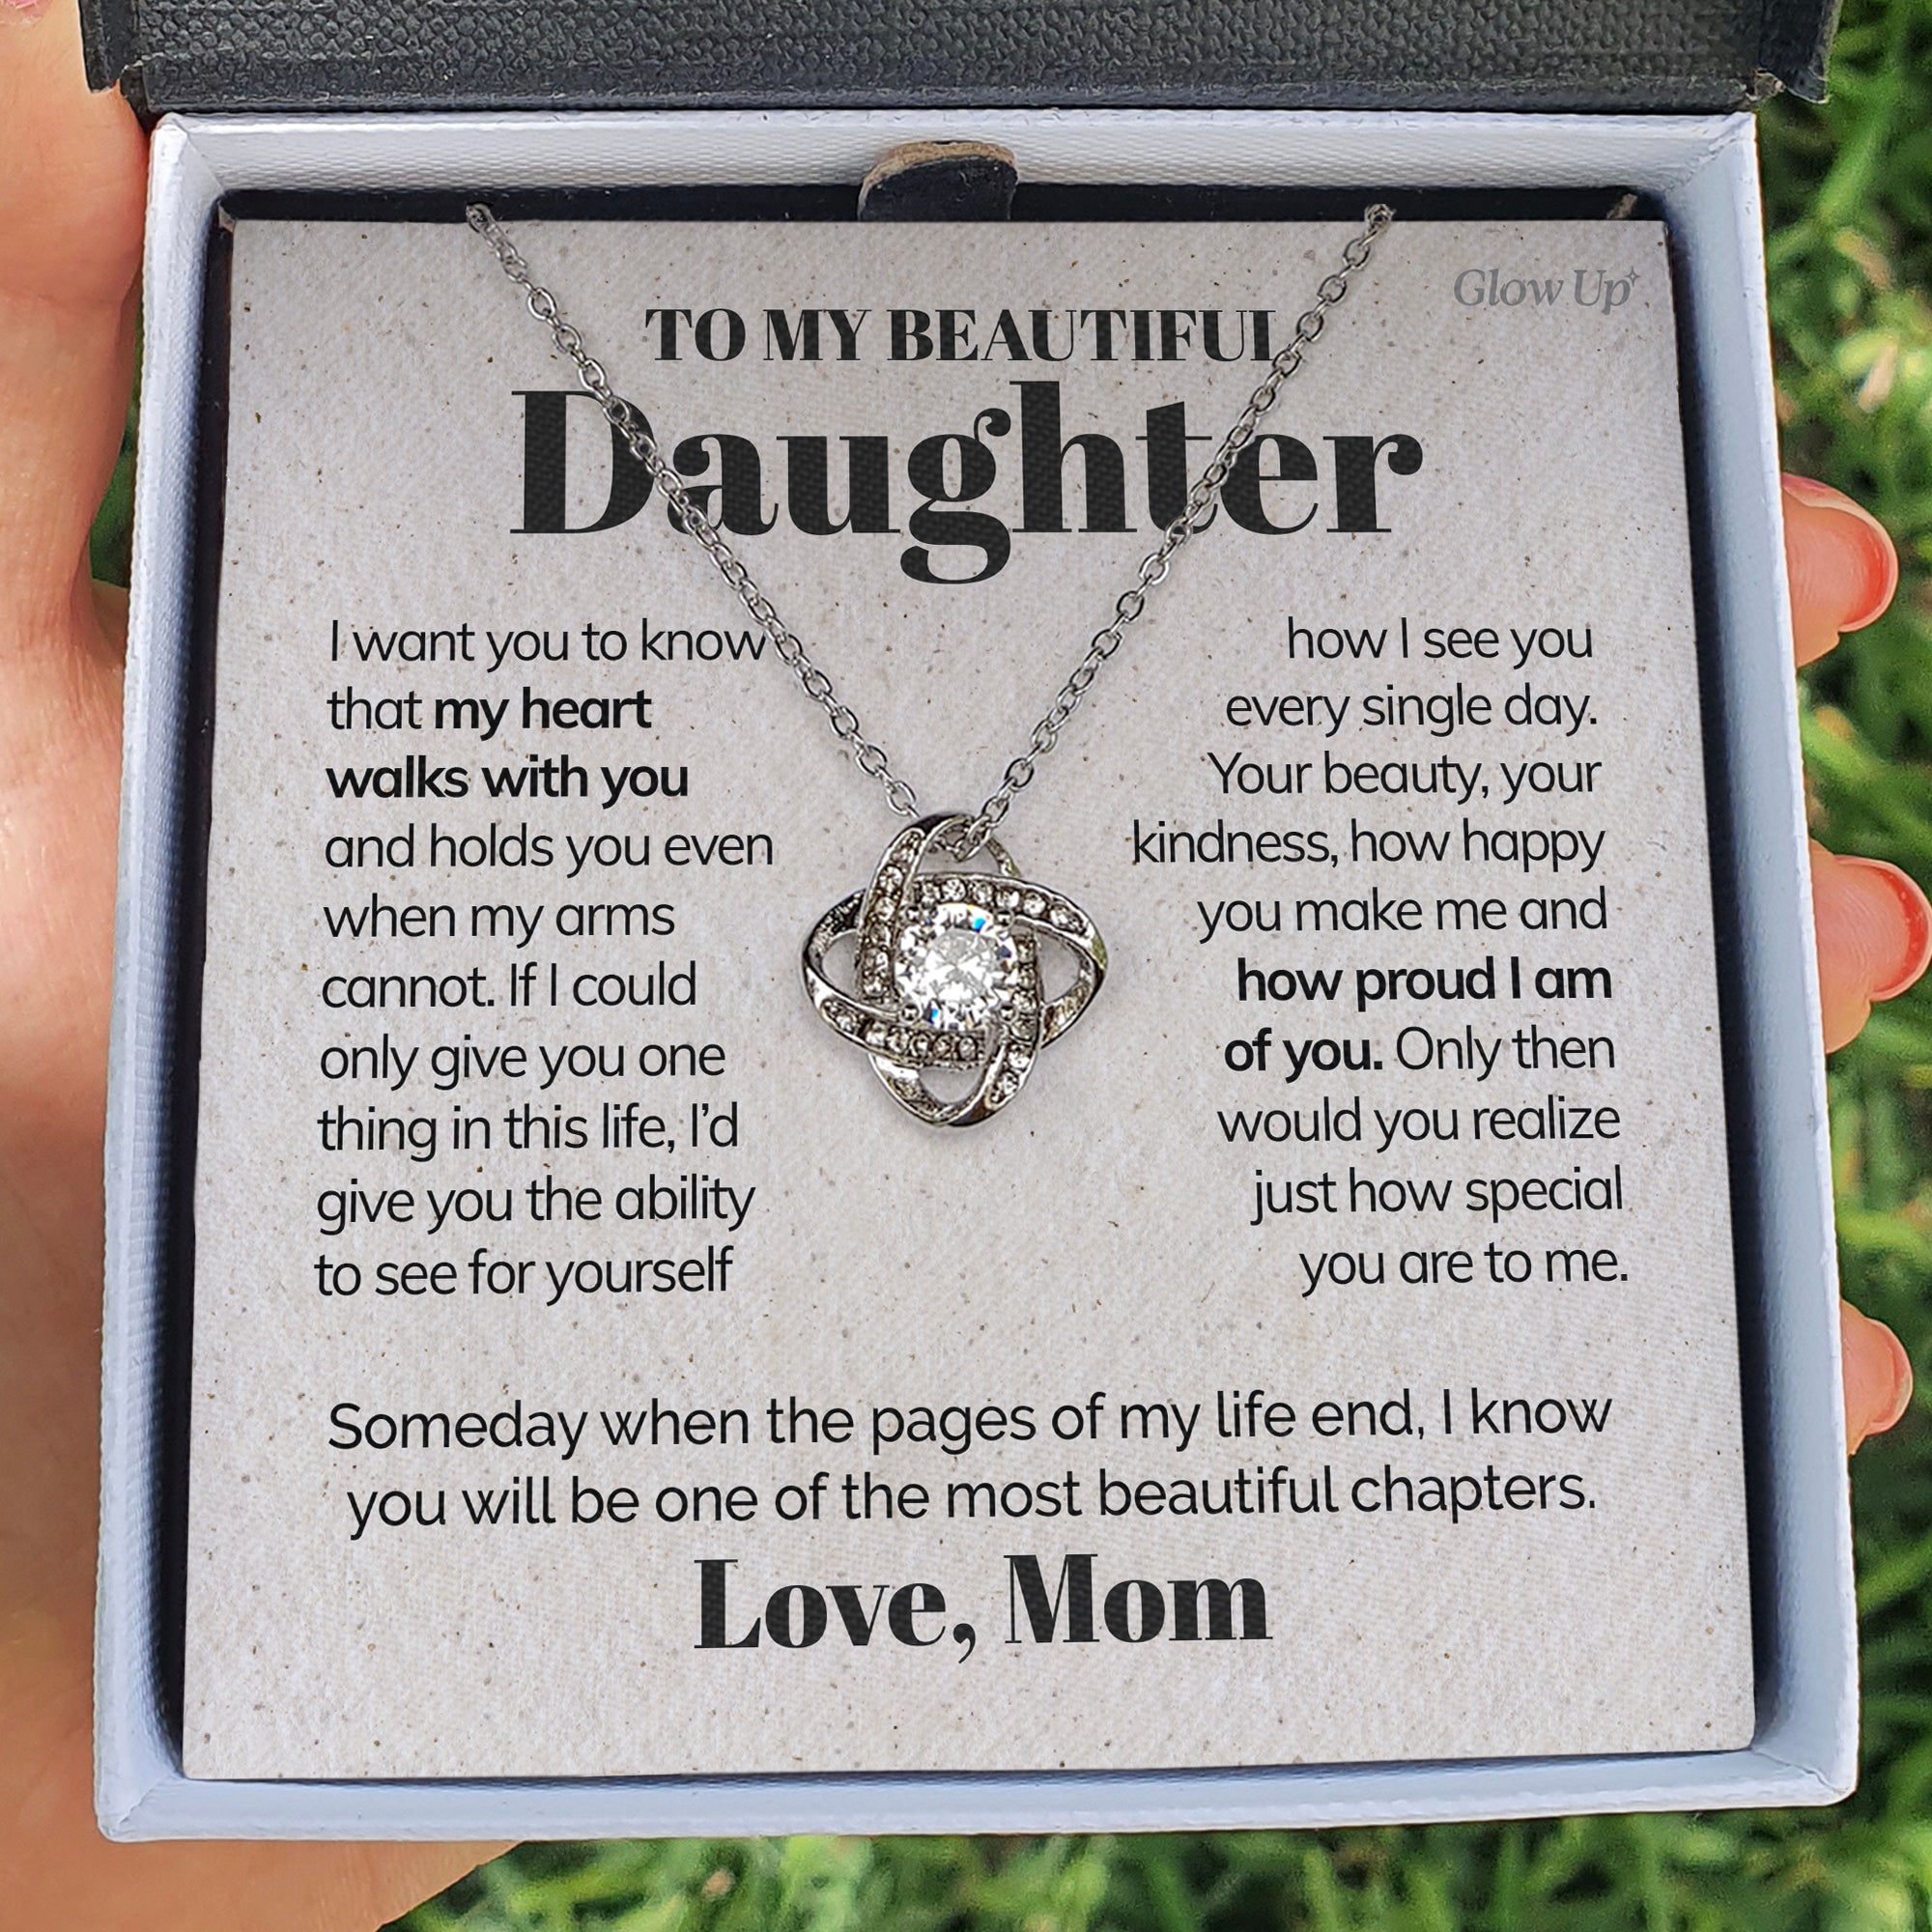 ShineOn Fulfillment Jewelry Two Toned Box To my Beautiful Daughter - I'm Proud of You - Loveknot necklace